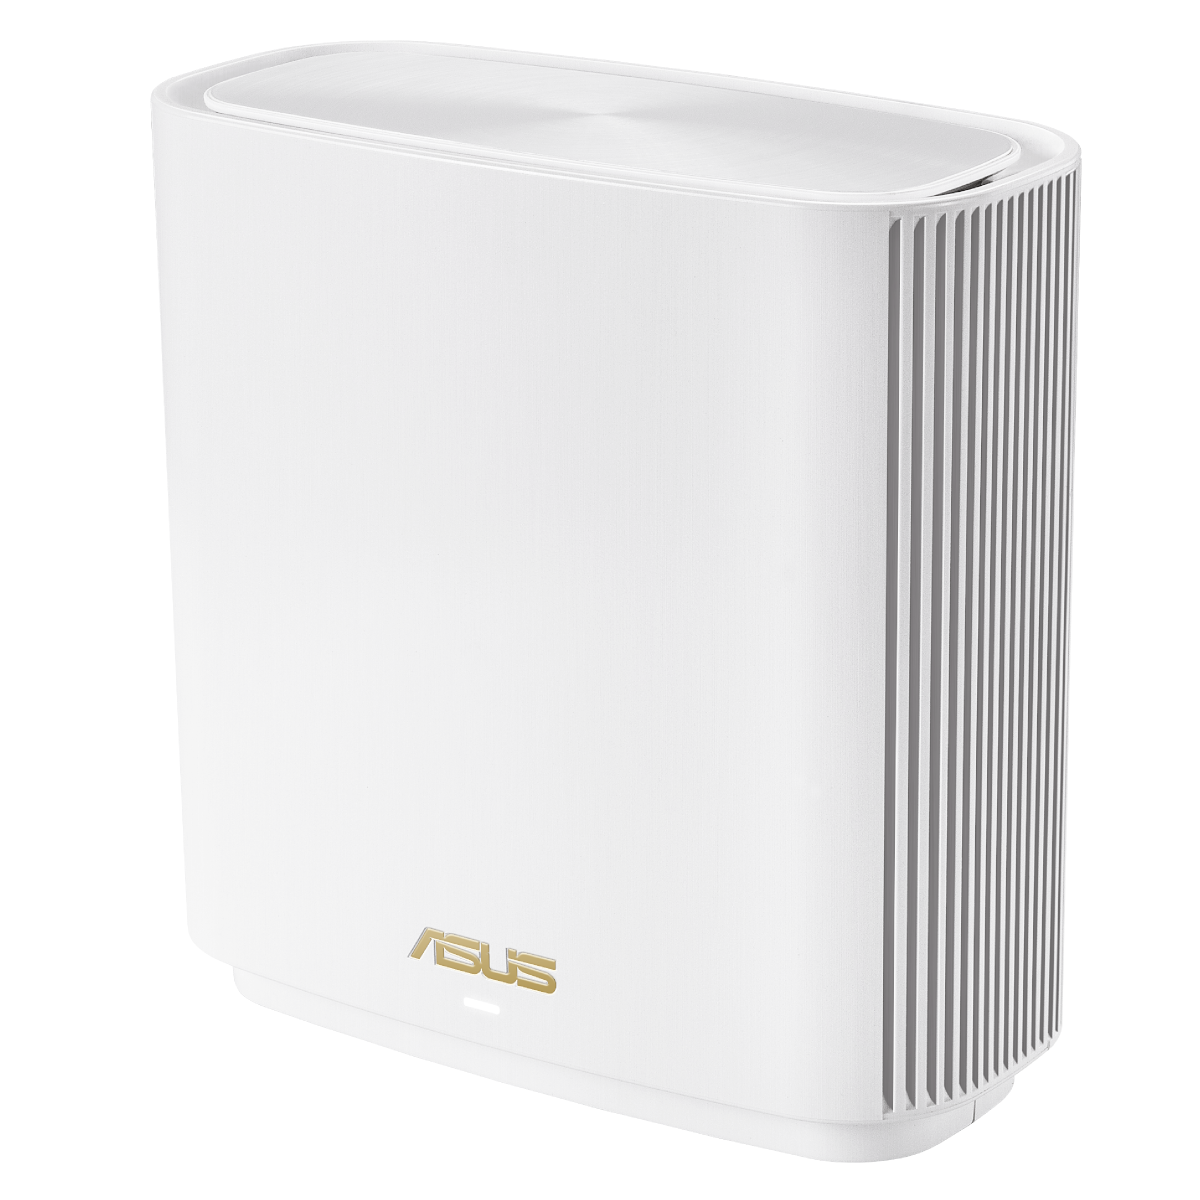 ASUS ZenWifi AX (XT8) AX6600 WiFi 6 Mesh System, Pack of 2 - White